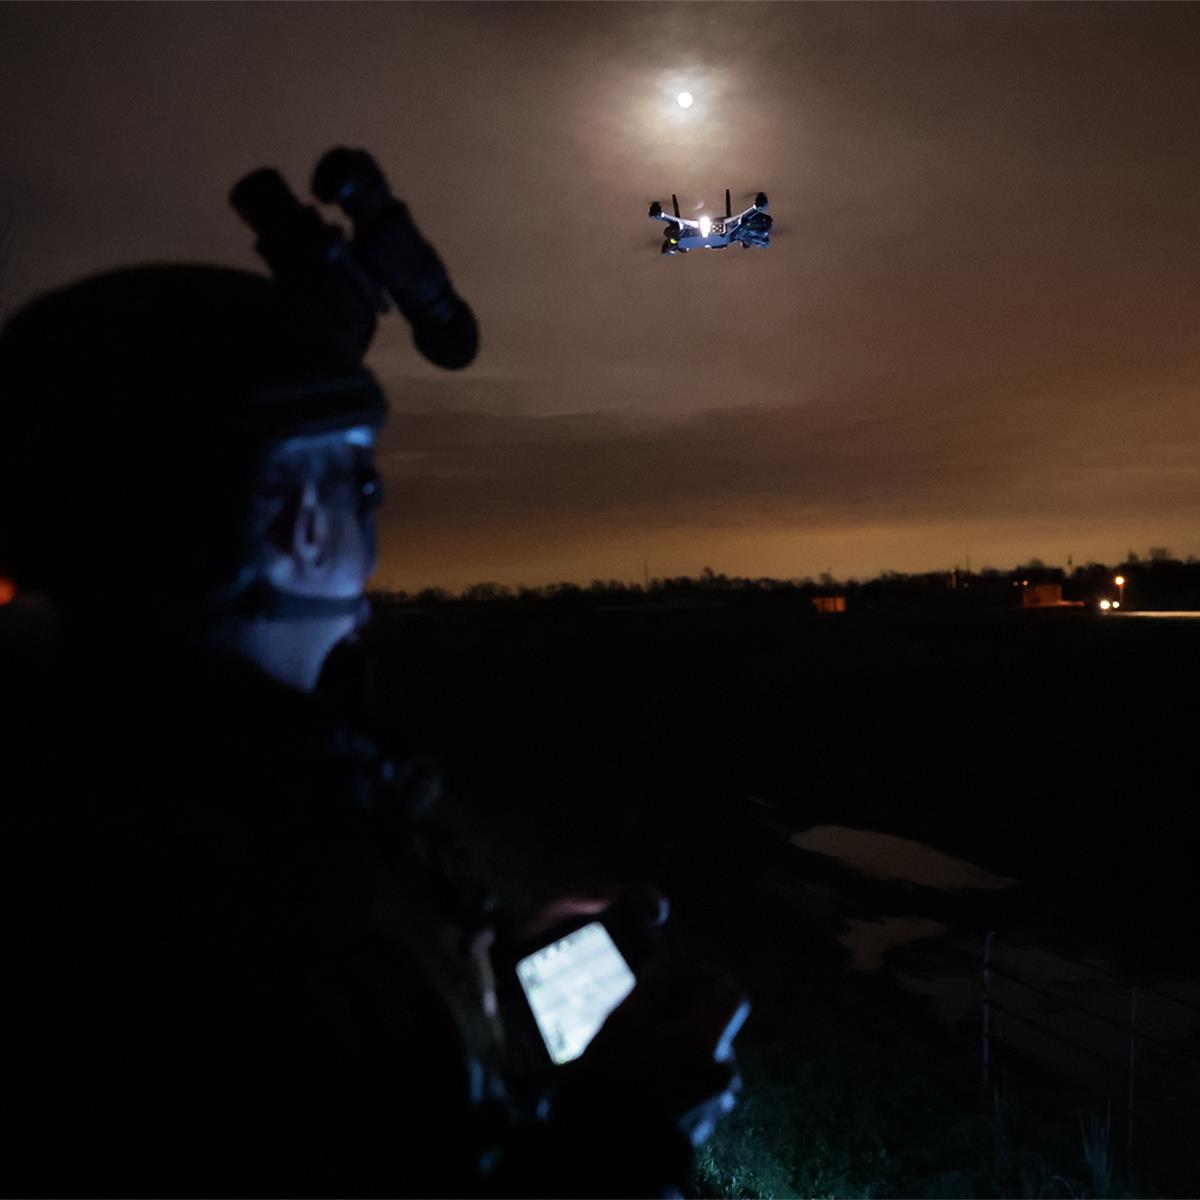 Teal 2 sUAS Drone System 2.4Ghz with FLIR Hadron 640R EO/IR Payload